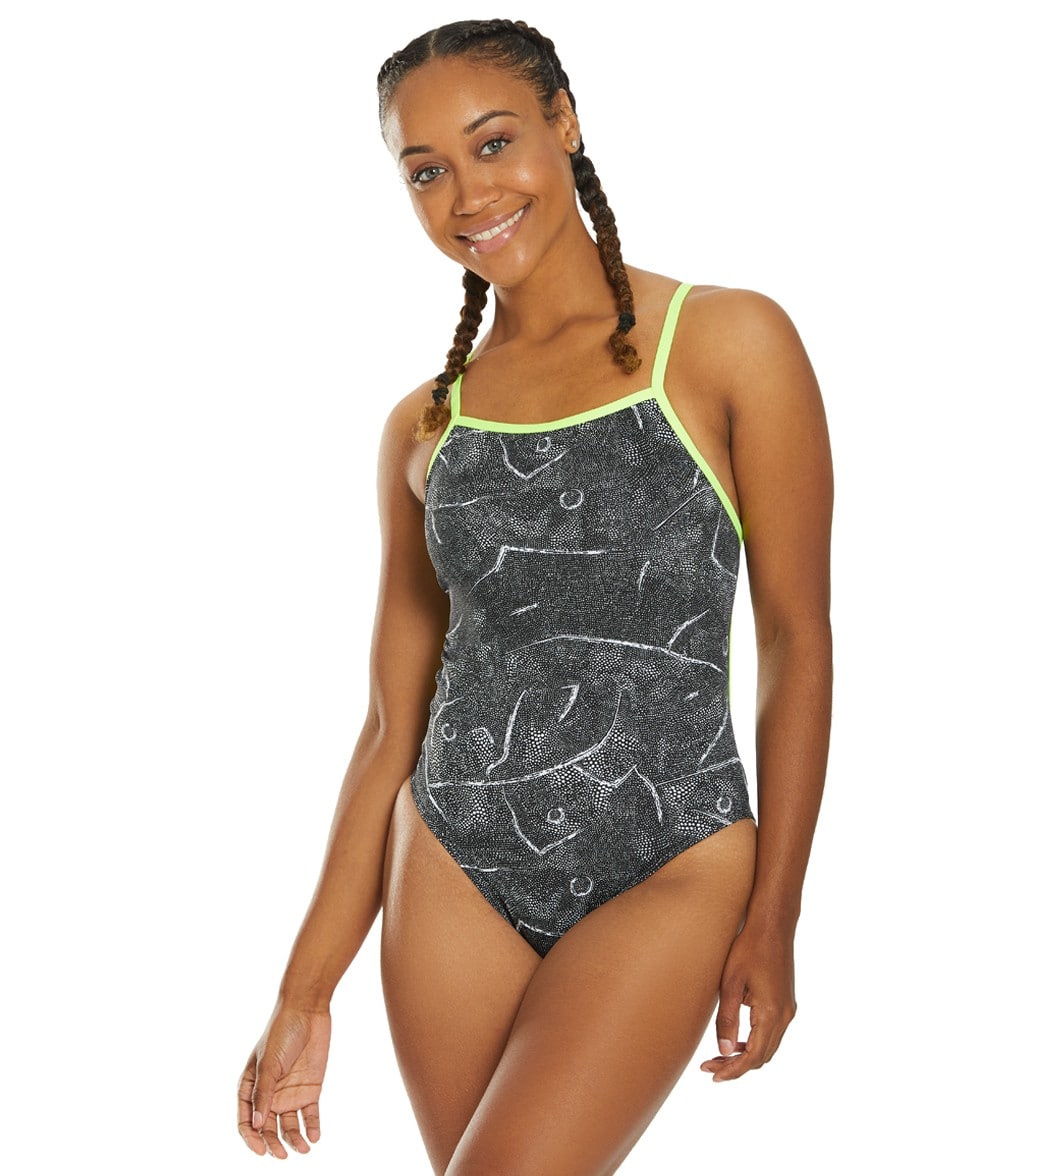 Funkita Women's Crack Up Tie Me Tight One Piece Swimsuit - Black/White 32 Polyester - Swimoutlet.com